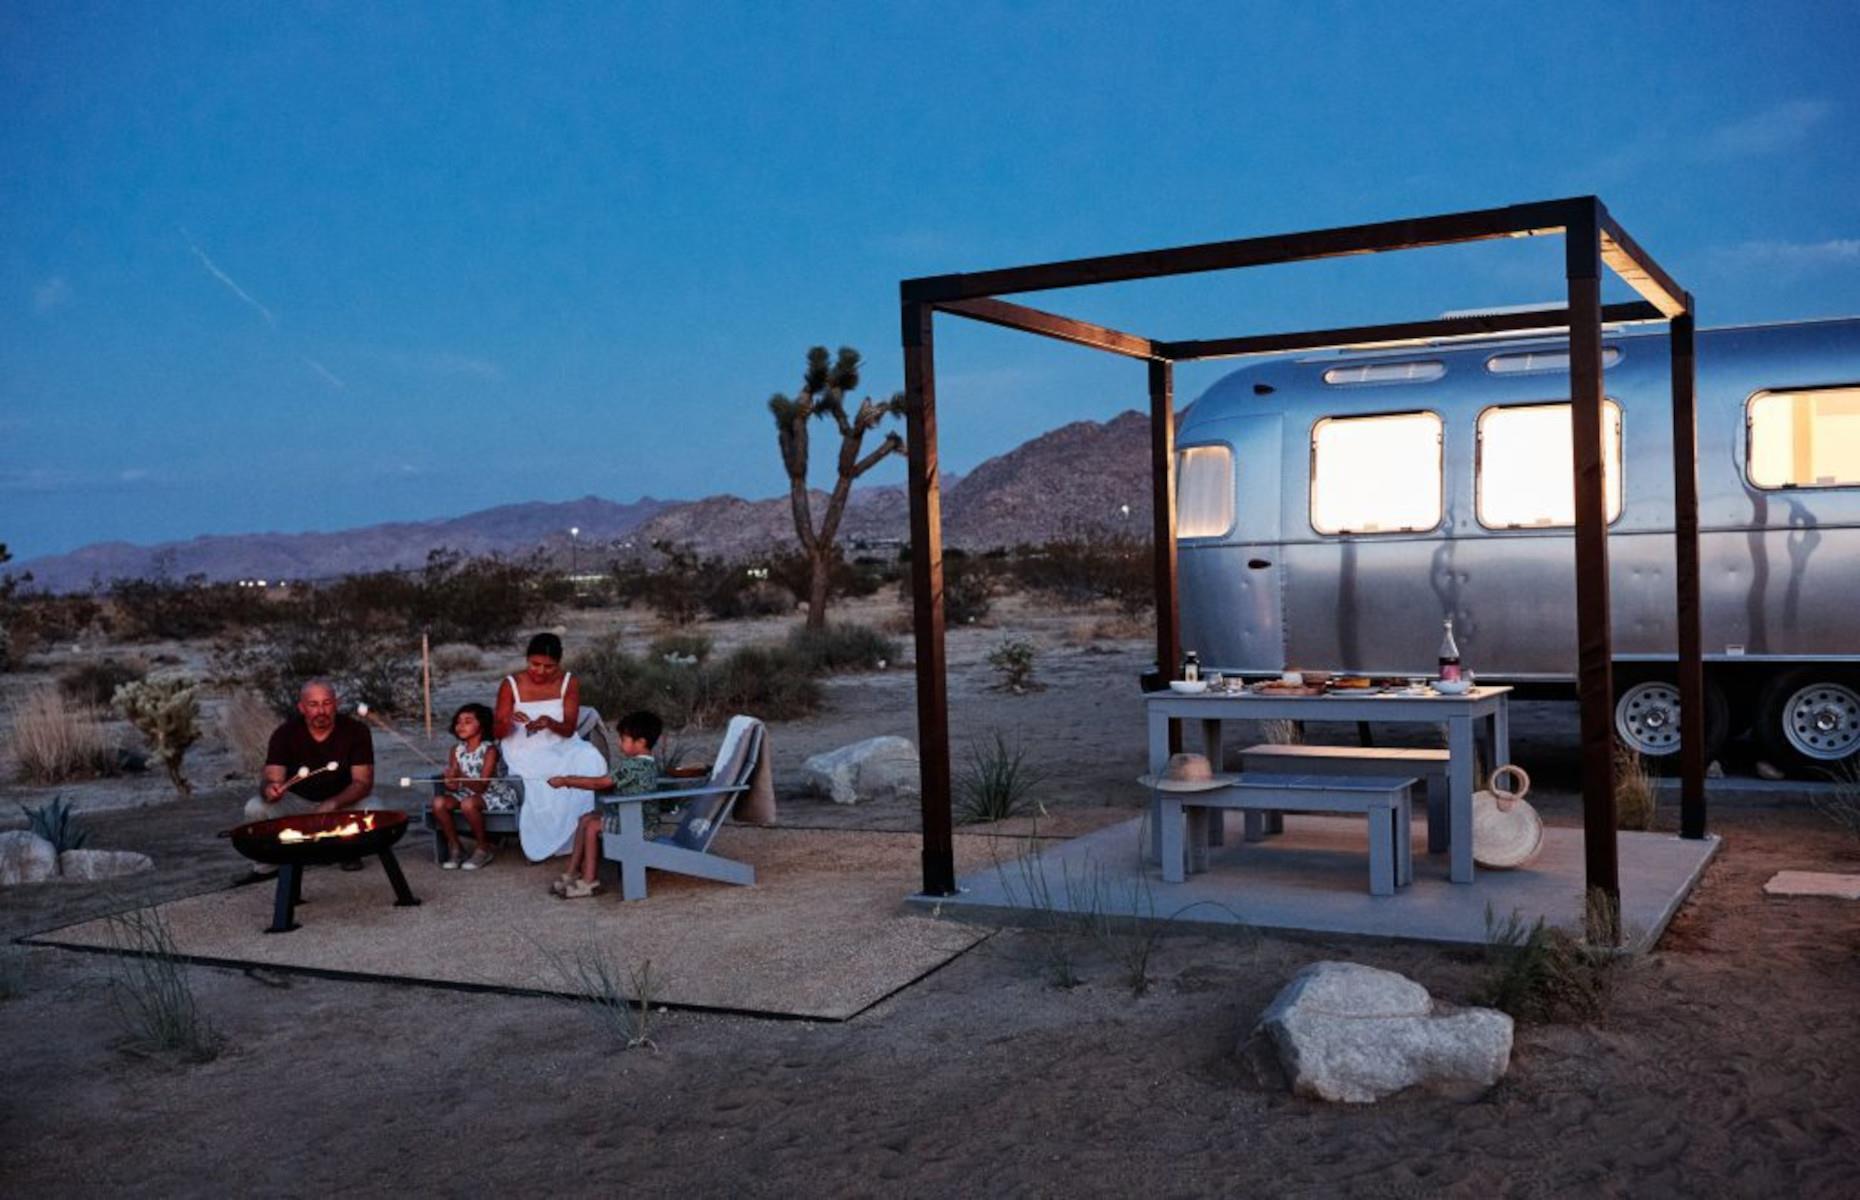 <p>Just outside of Joshua Tree National Park, a campsite of luxury Airstreams offers guests the chance to sleep under the stars, surrounded by the stunning desert landscape. </p>  <p><a href="http://autocamp.com/property/premium-airstream-suite/">Available to rent</a>, the stunning trailers are a beautifully updated homage to the original Airstream design.</p>